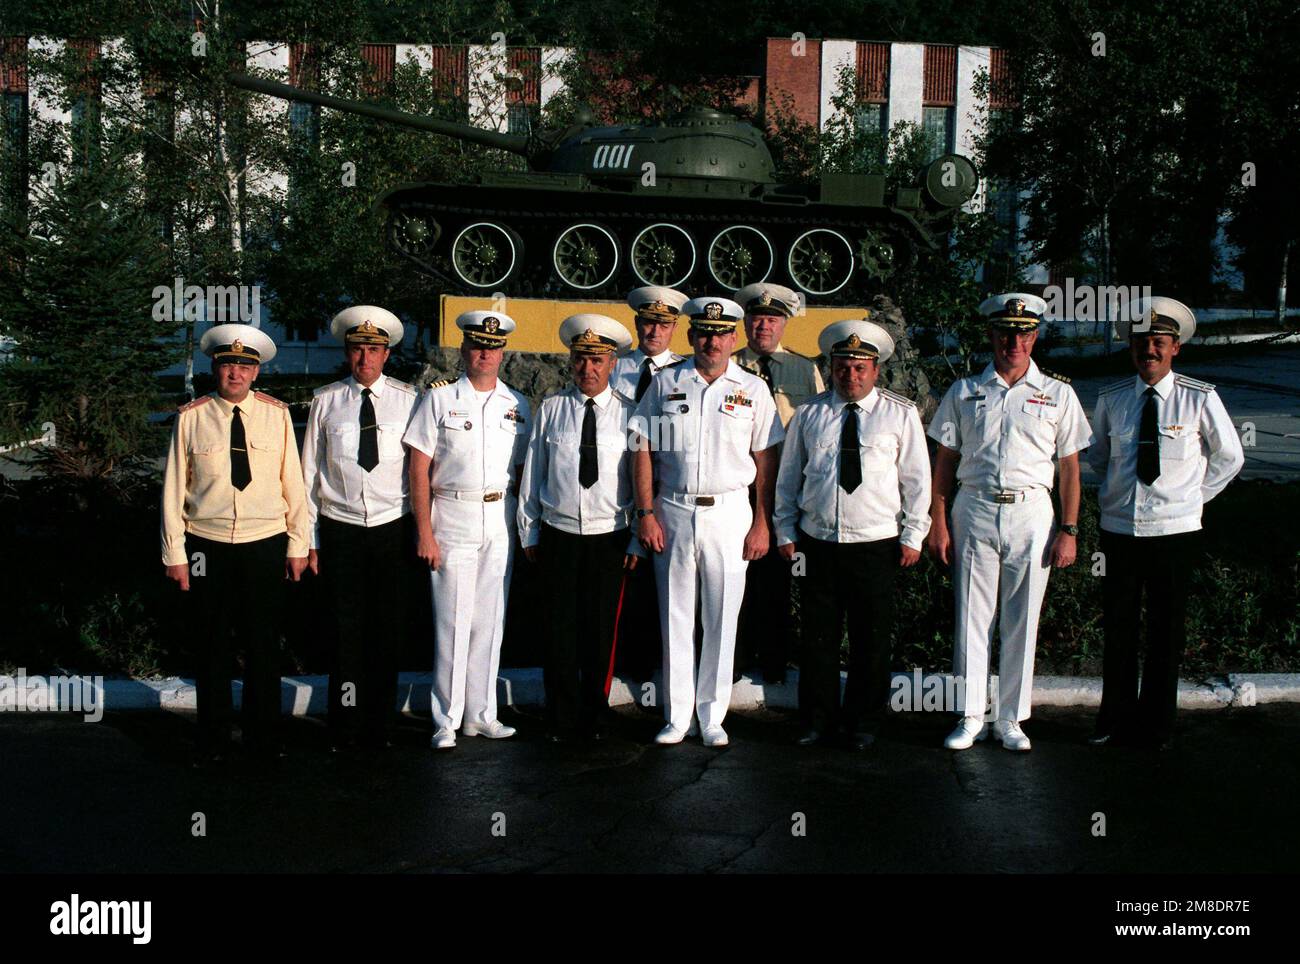 American and Soviet officers gather for a photograph in front of a T-54 tank at a Soviet navy service school during a visit to the city by two US Navy ships. The guided missile cruiser USS PRINCETON (CG-59) and the guided missile frigate USS REUBEN JAMES (FFG 57) are in Vladivostok for four days as part of a goodwill exchange program. Base: Vladivostok State: Siberia Country: U.S.S.R. (SUN) Stock Photo